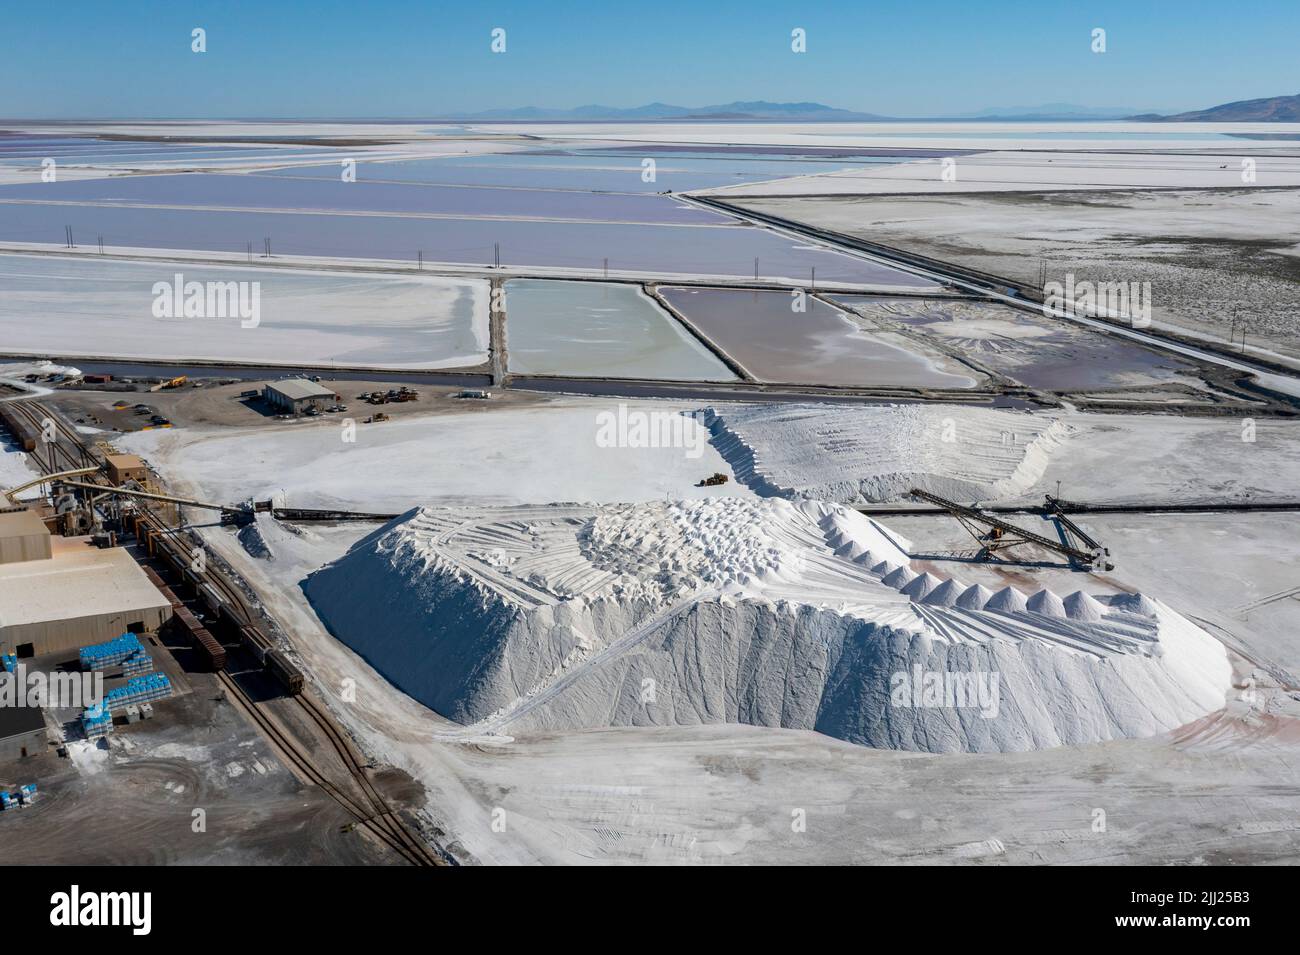 Grantsville, Utah - The Cargill salt facility, where salt is produced by impounding brine in shallow evaporation ponds at the edge of Great Salt Lake. Stock Photo